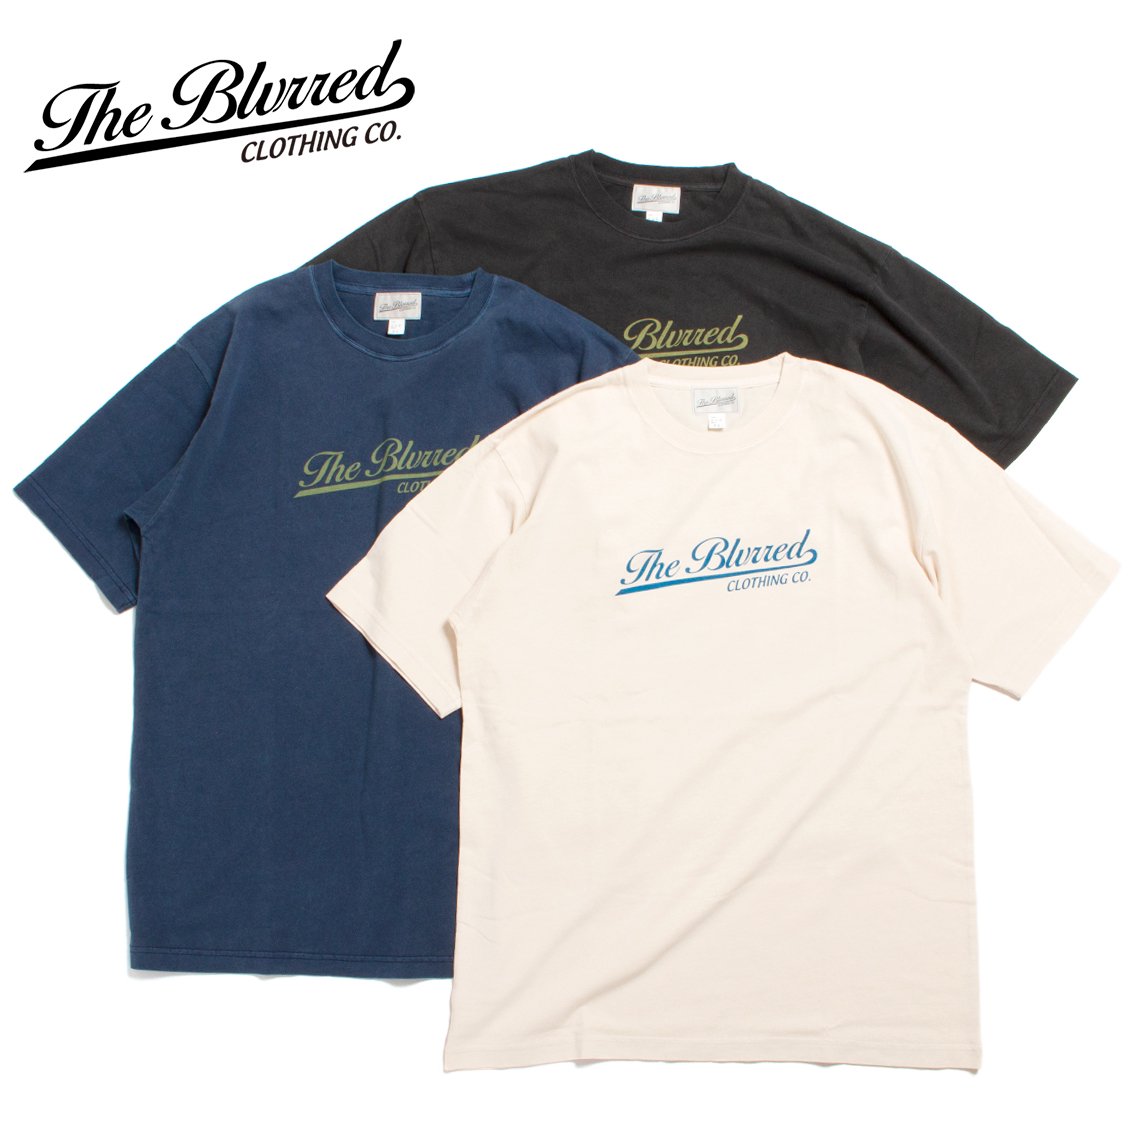 BLURRED CLOTHING / ブラードクロージング] ADVERTISING T-SHIRTS T 